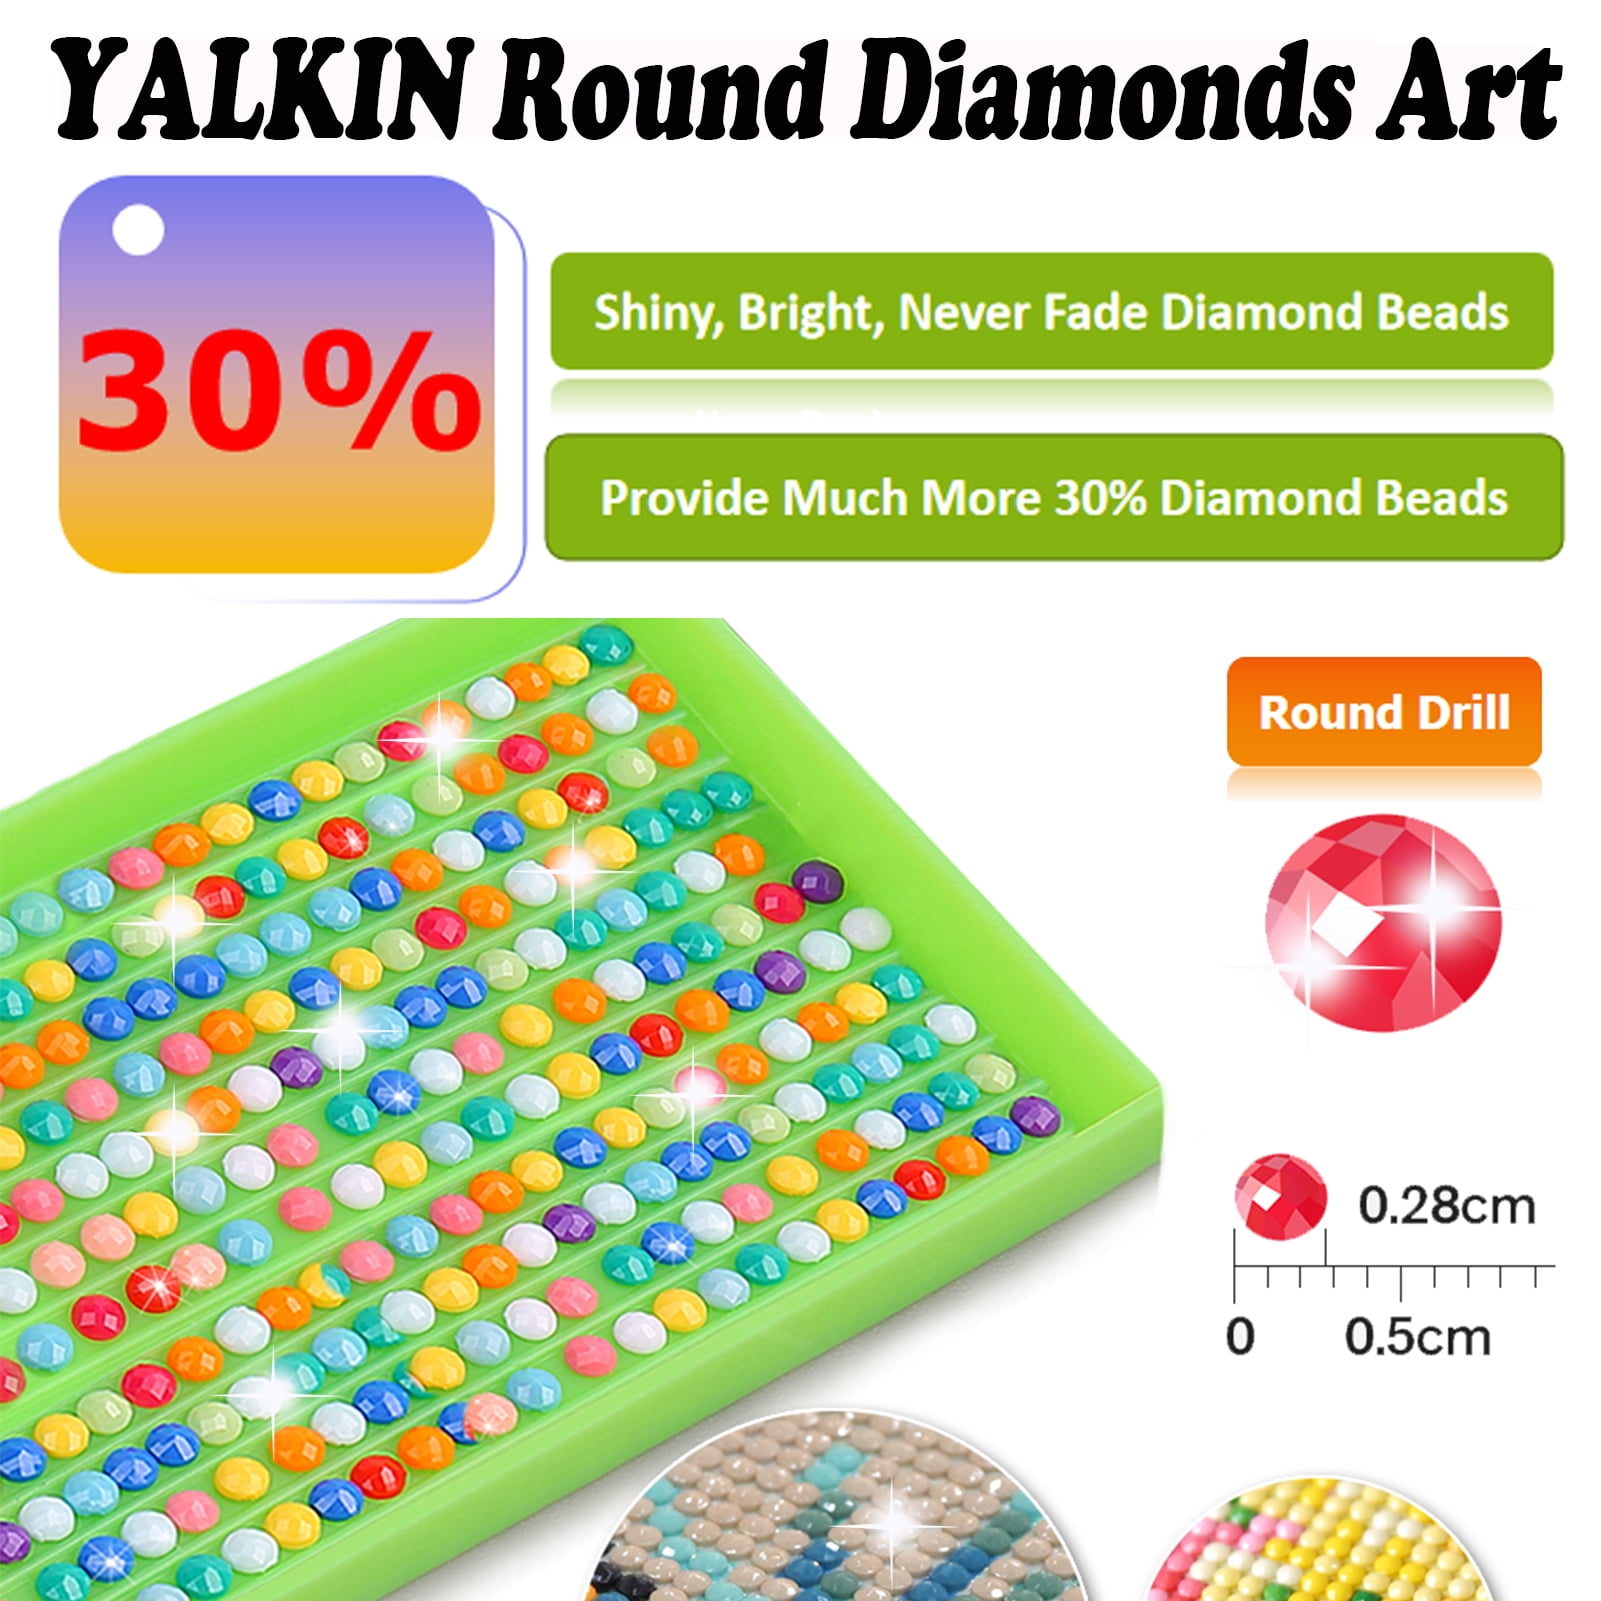 YALKIN 5D Diamond Painting Kits for Adults DIY Astronaut Hello Kitty Full Round Drill (11.8x15.7 inch) Embroidery Pictures AR